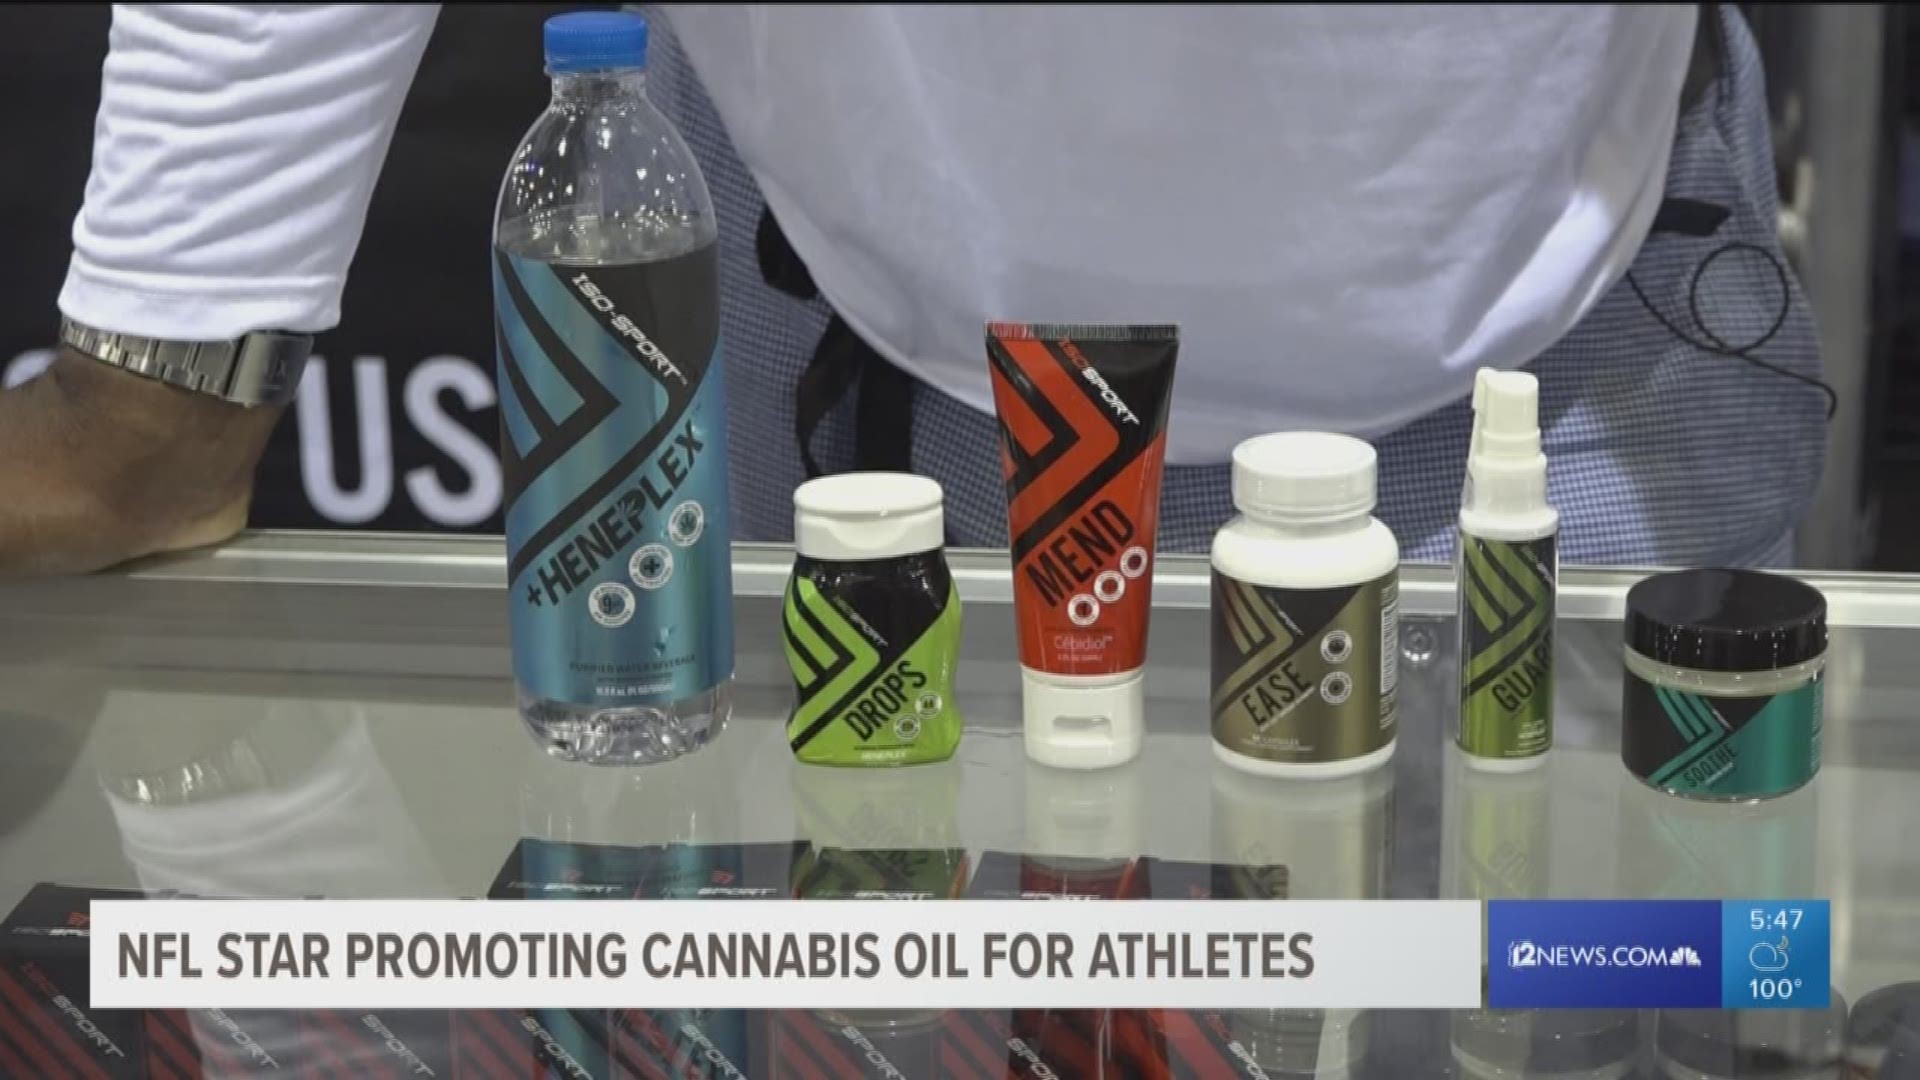 Marvin Washington knows a thing or two about pain after 11 years in the NFL. He says CBD products help him with his pain, and he's bought in.